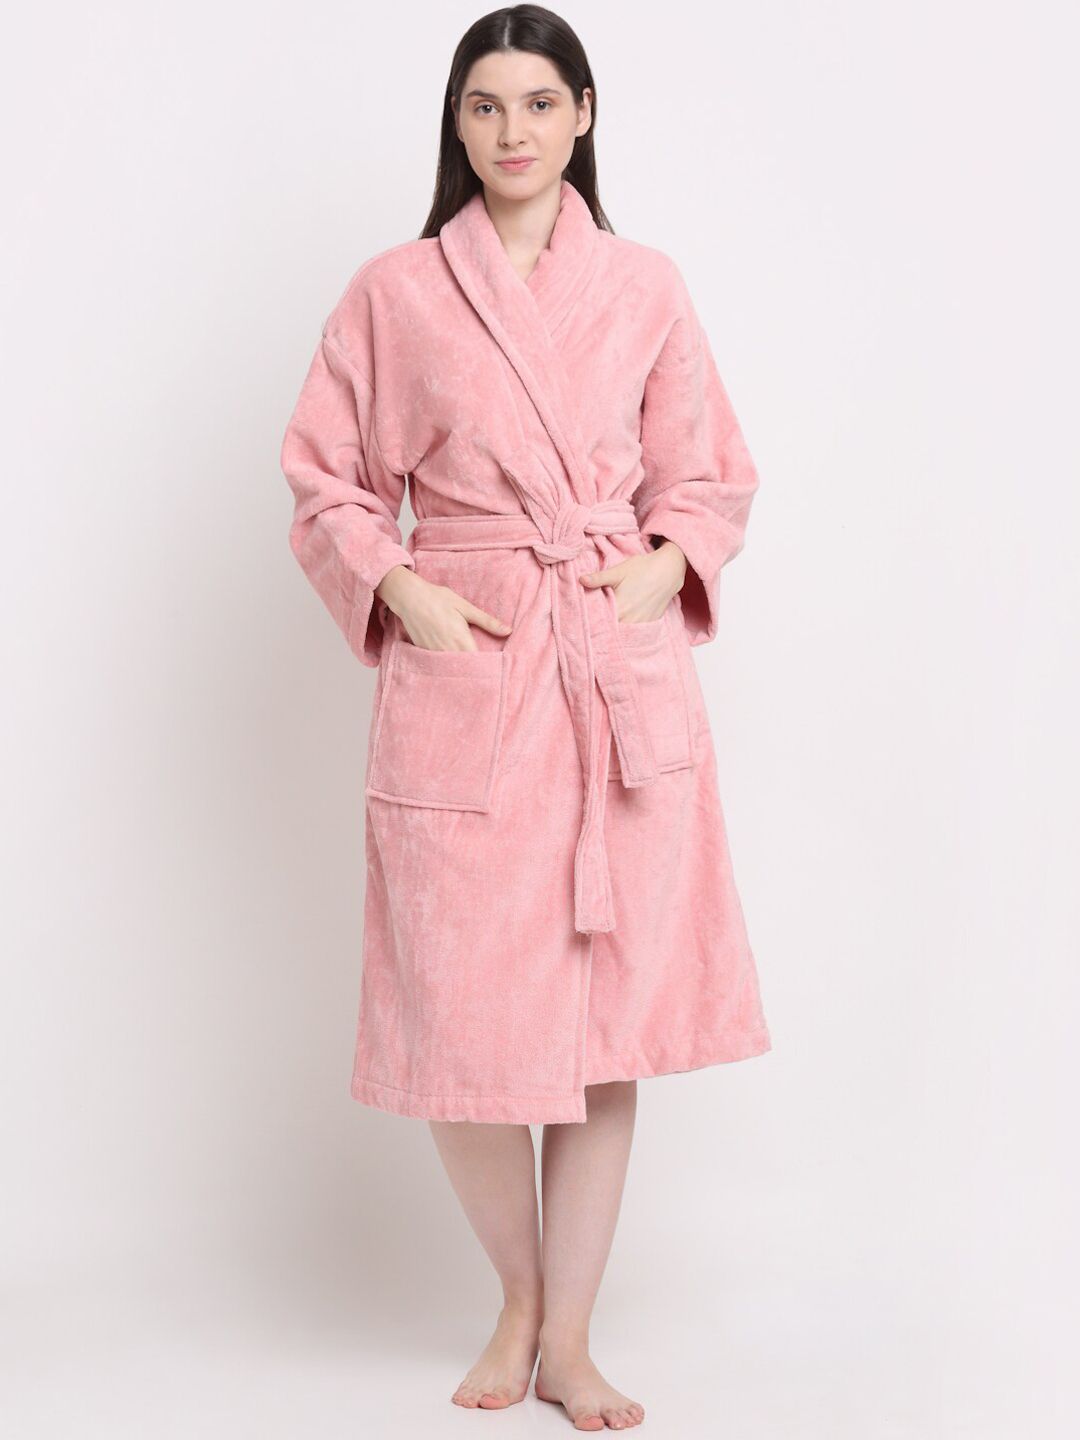 Creeva Pink Solid Bath Robe Price in India